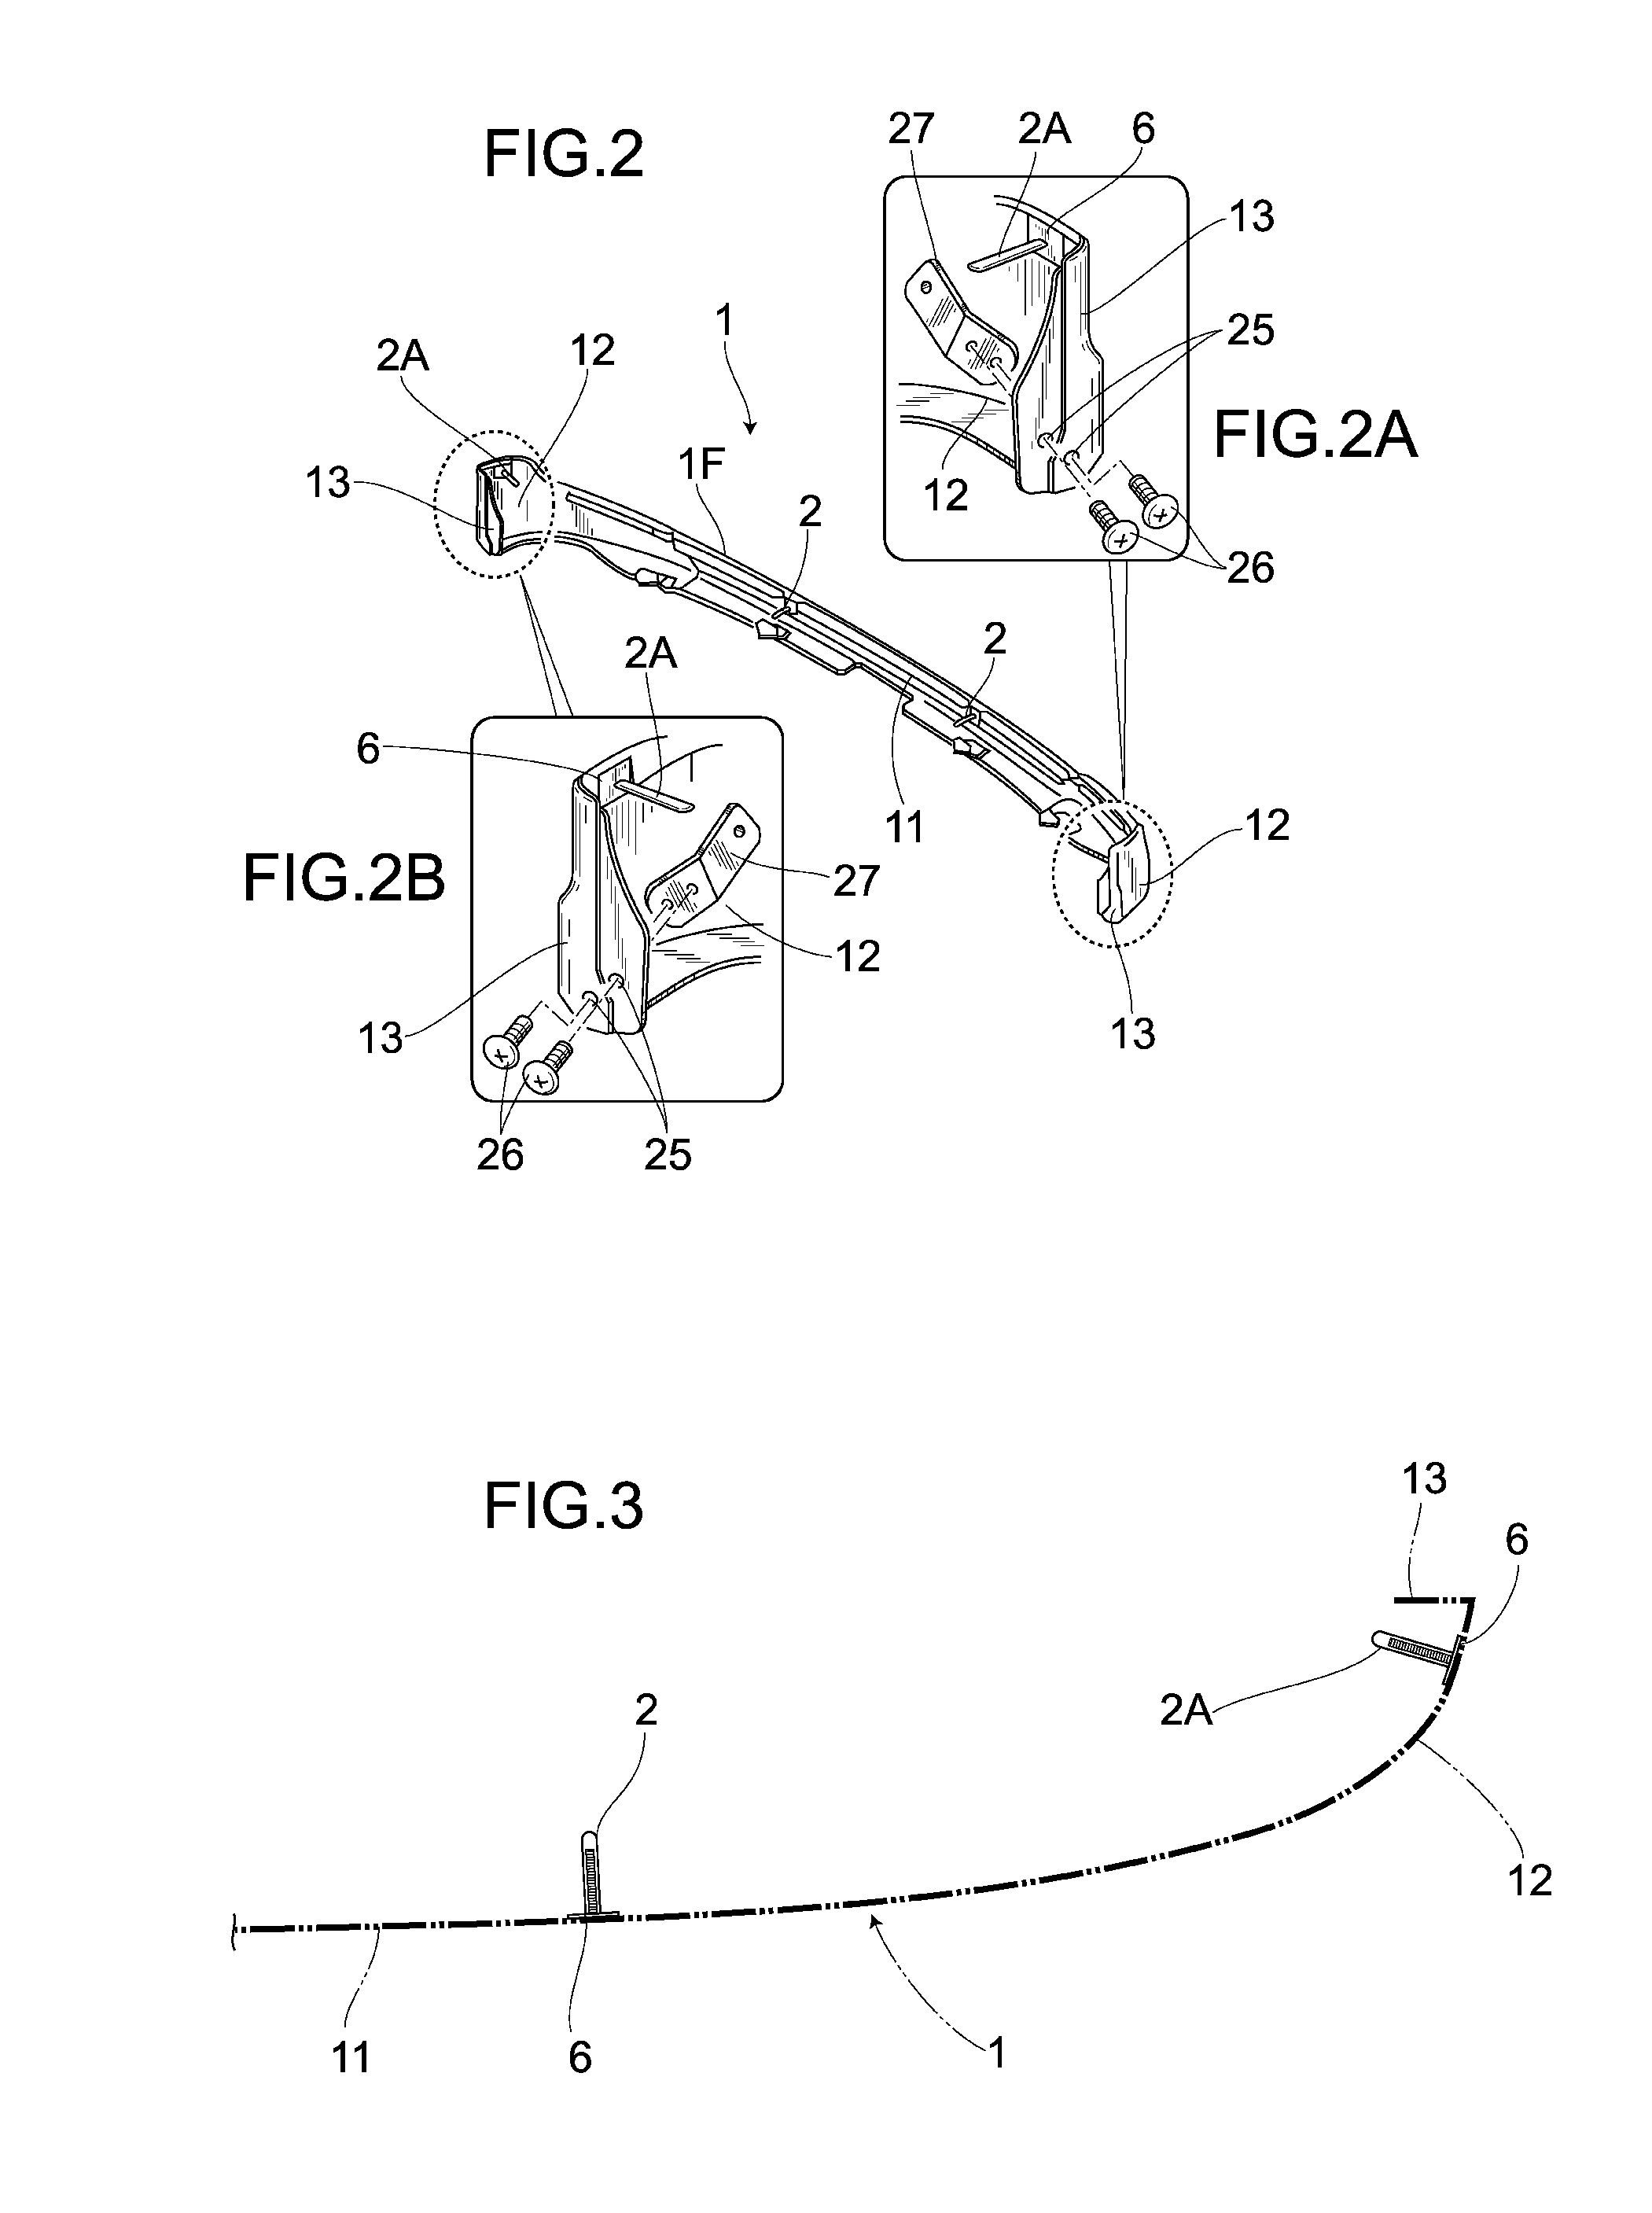 Structure for mounting an attachment for vehicle